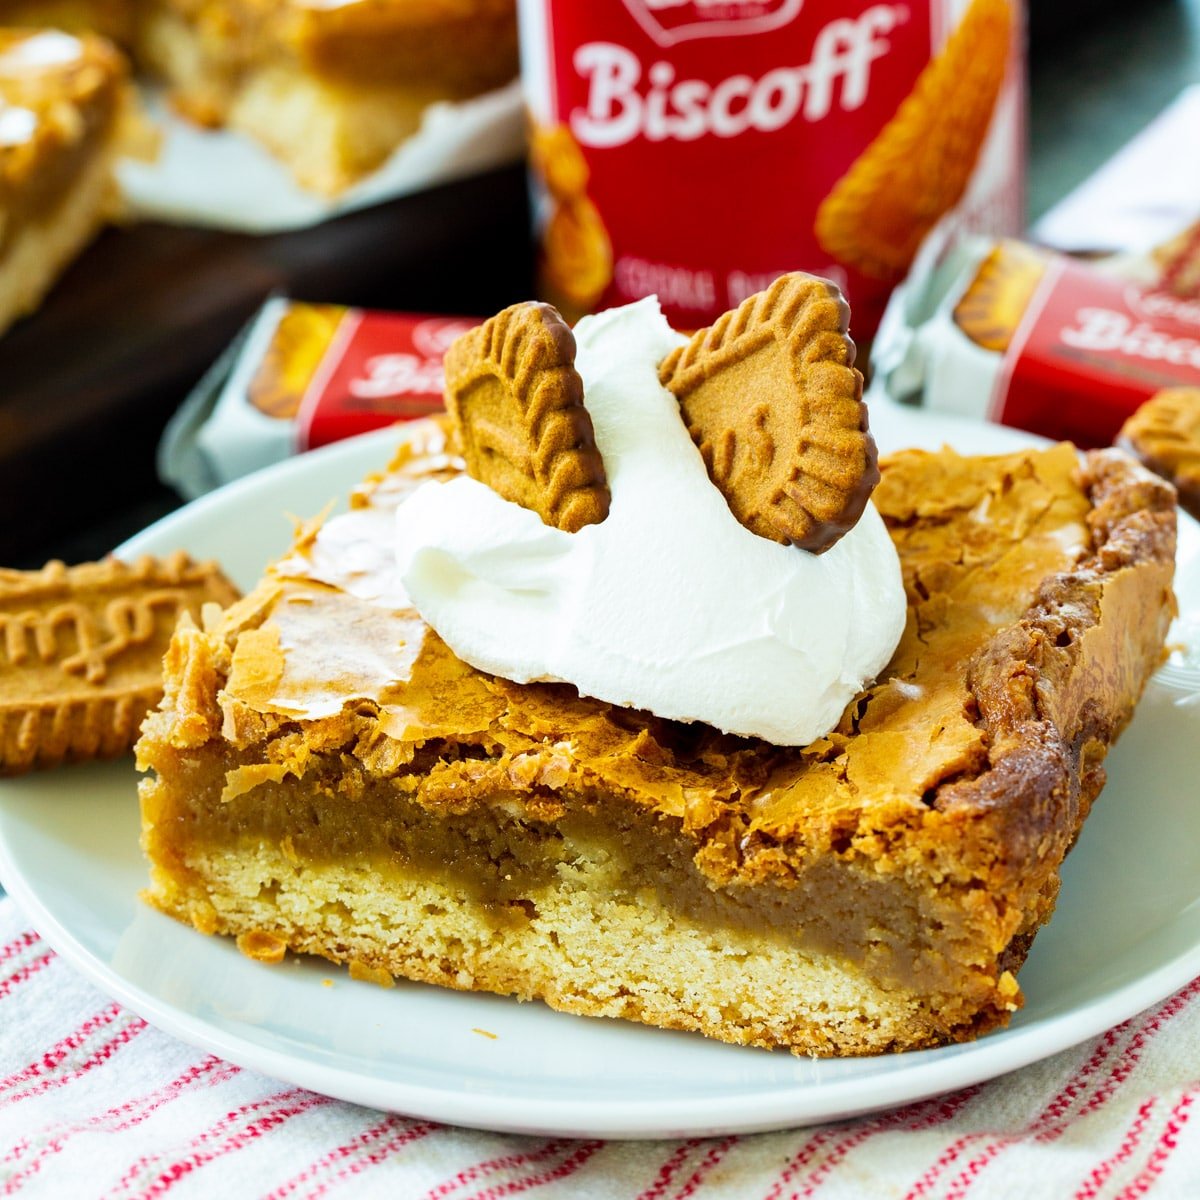 Biscoff Gooey Butter Bar topped with whipped cream on a plate.